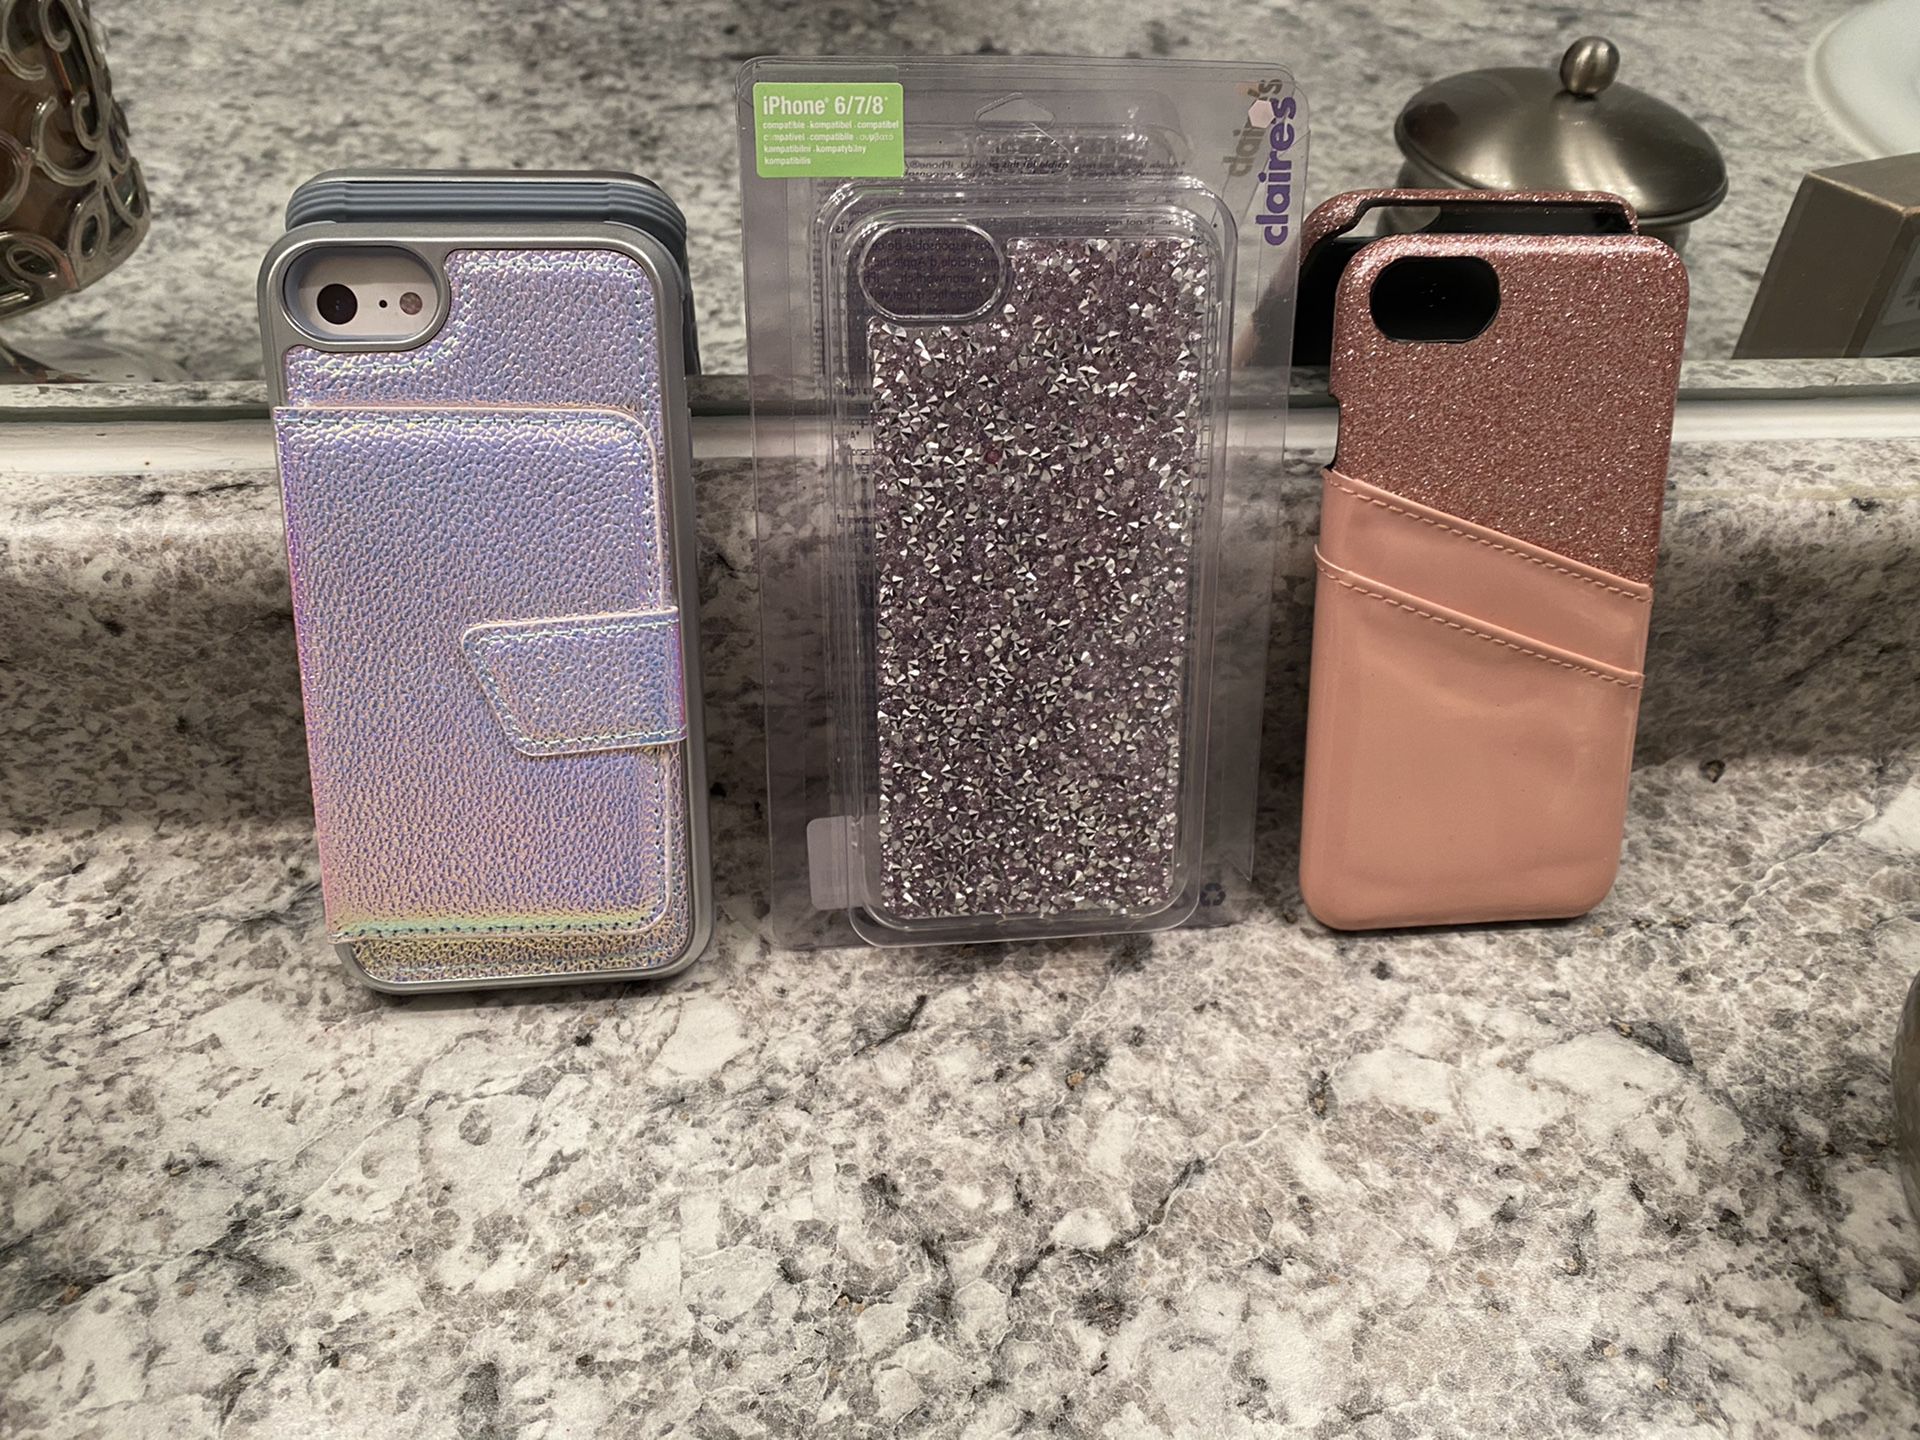 3 BRAND NEW IPHONE 6/7/8 PHONE CASES & PHONE CASE WALLETS